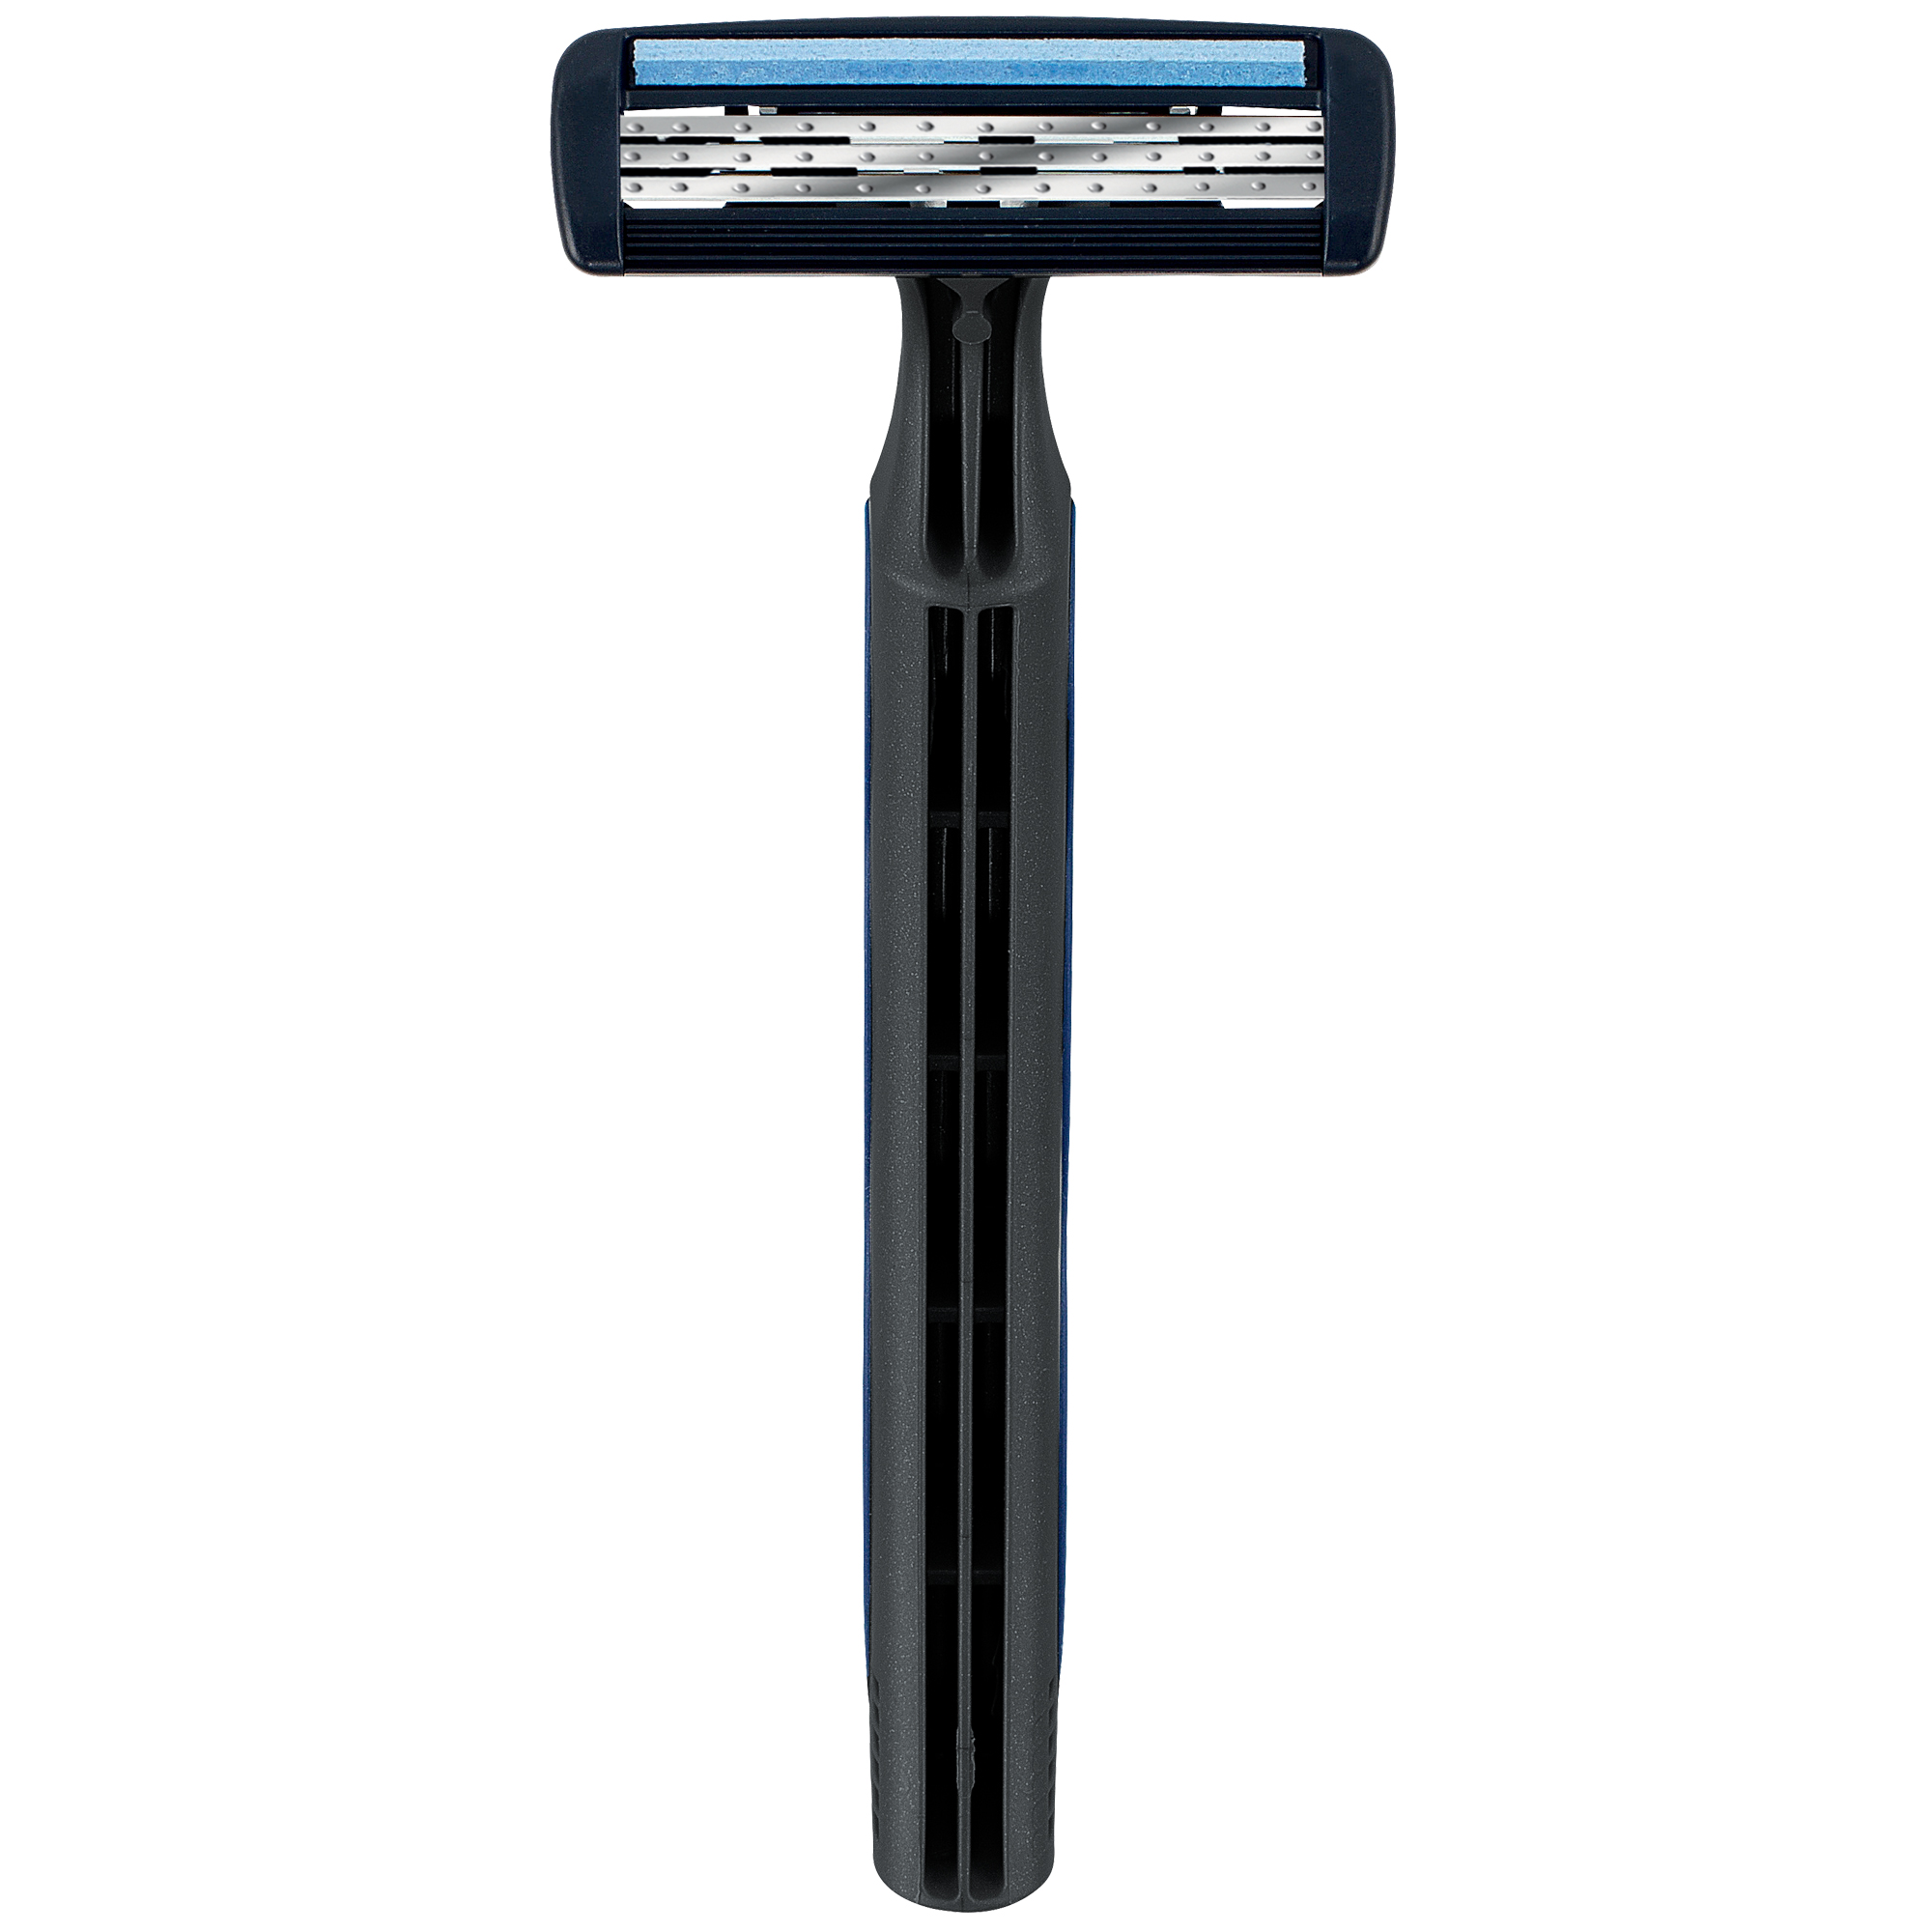 BIC Comfort 3 Disposable Men's Razor, 3 Blade Razor for a Comfortable Shave, 4-Count - image 3 of 7